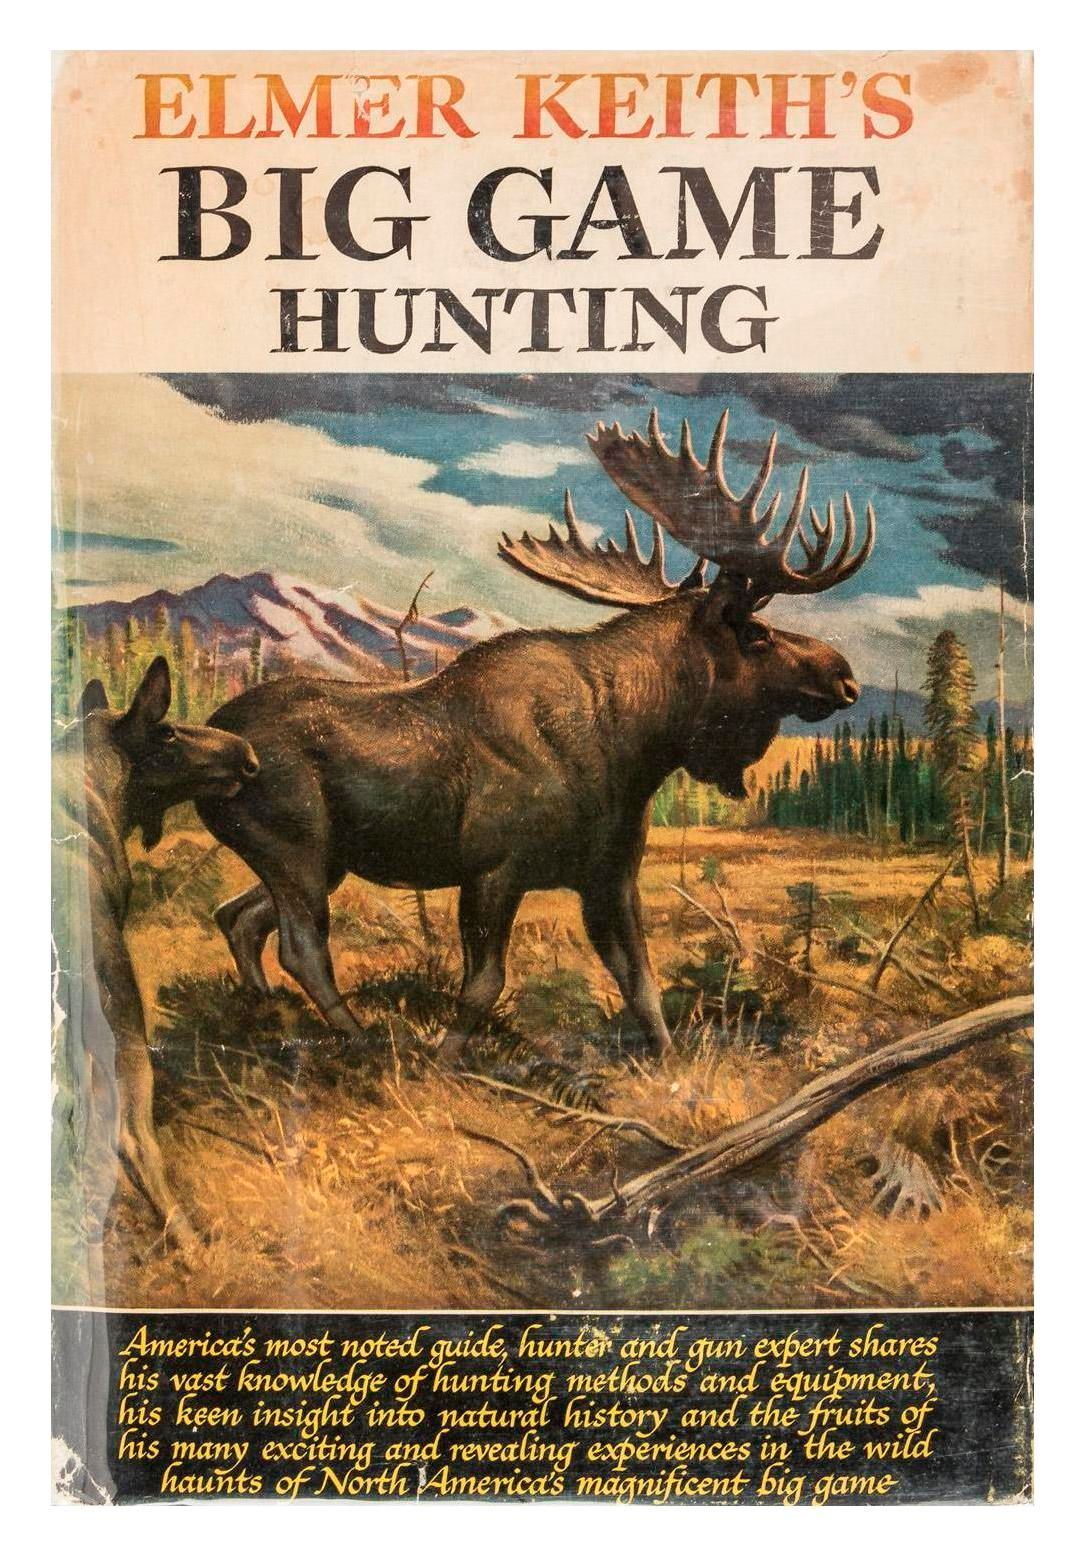 A copy of "Elmer Keith's Big Game Hunting" (1948 edition) is also included with Lot 488